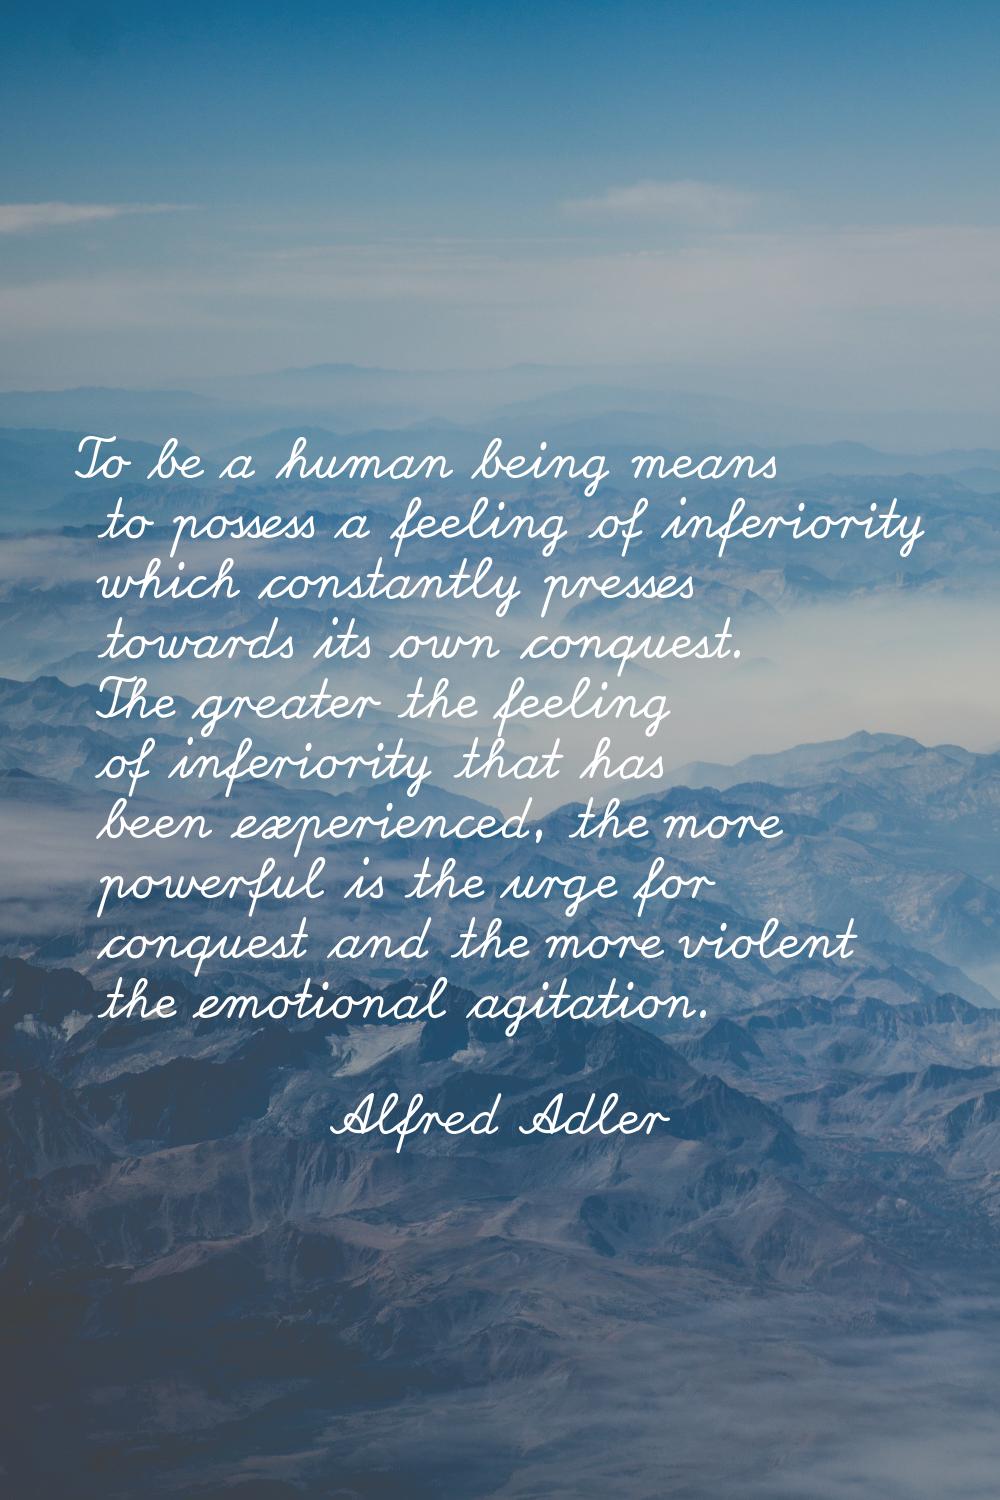 To be a human being means to possess a feeling of inferiority which constantly presses towards its 